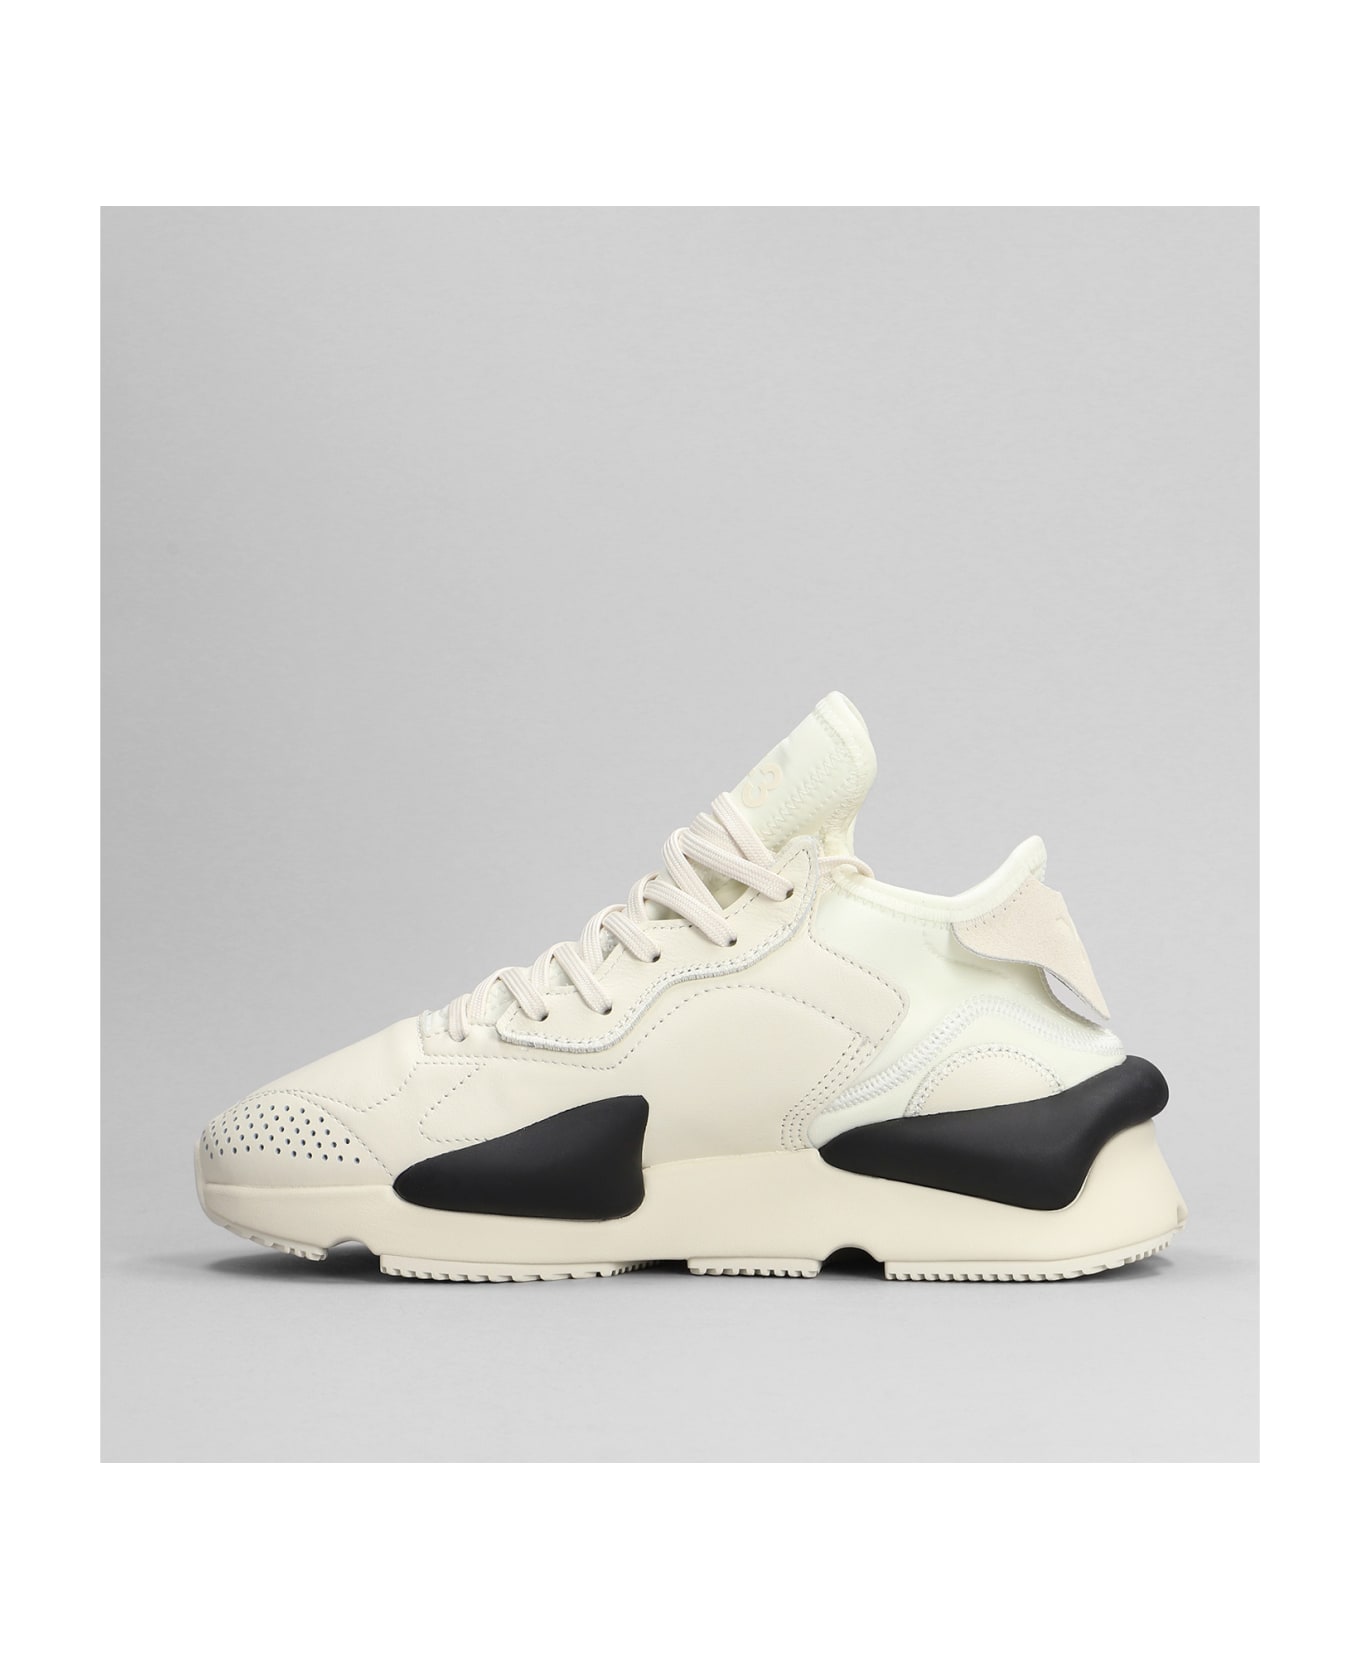 Y-3 Kaiwa Sneakers In Beige Leather - WHITE